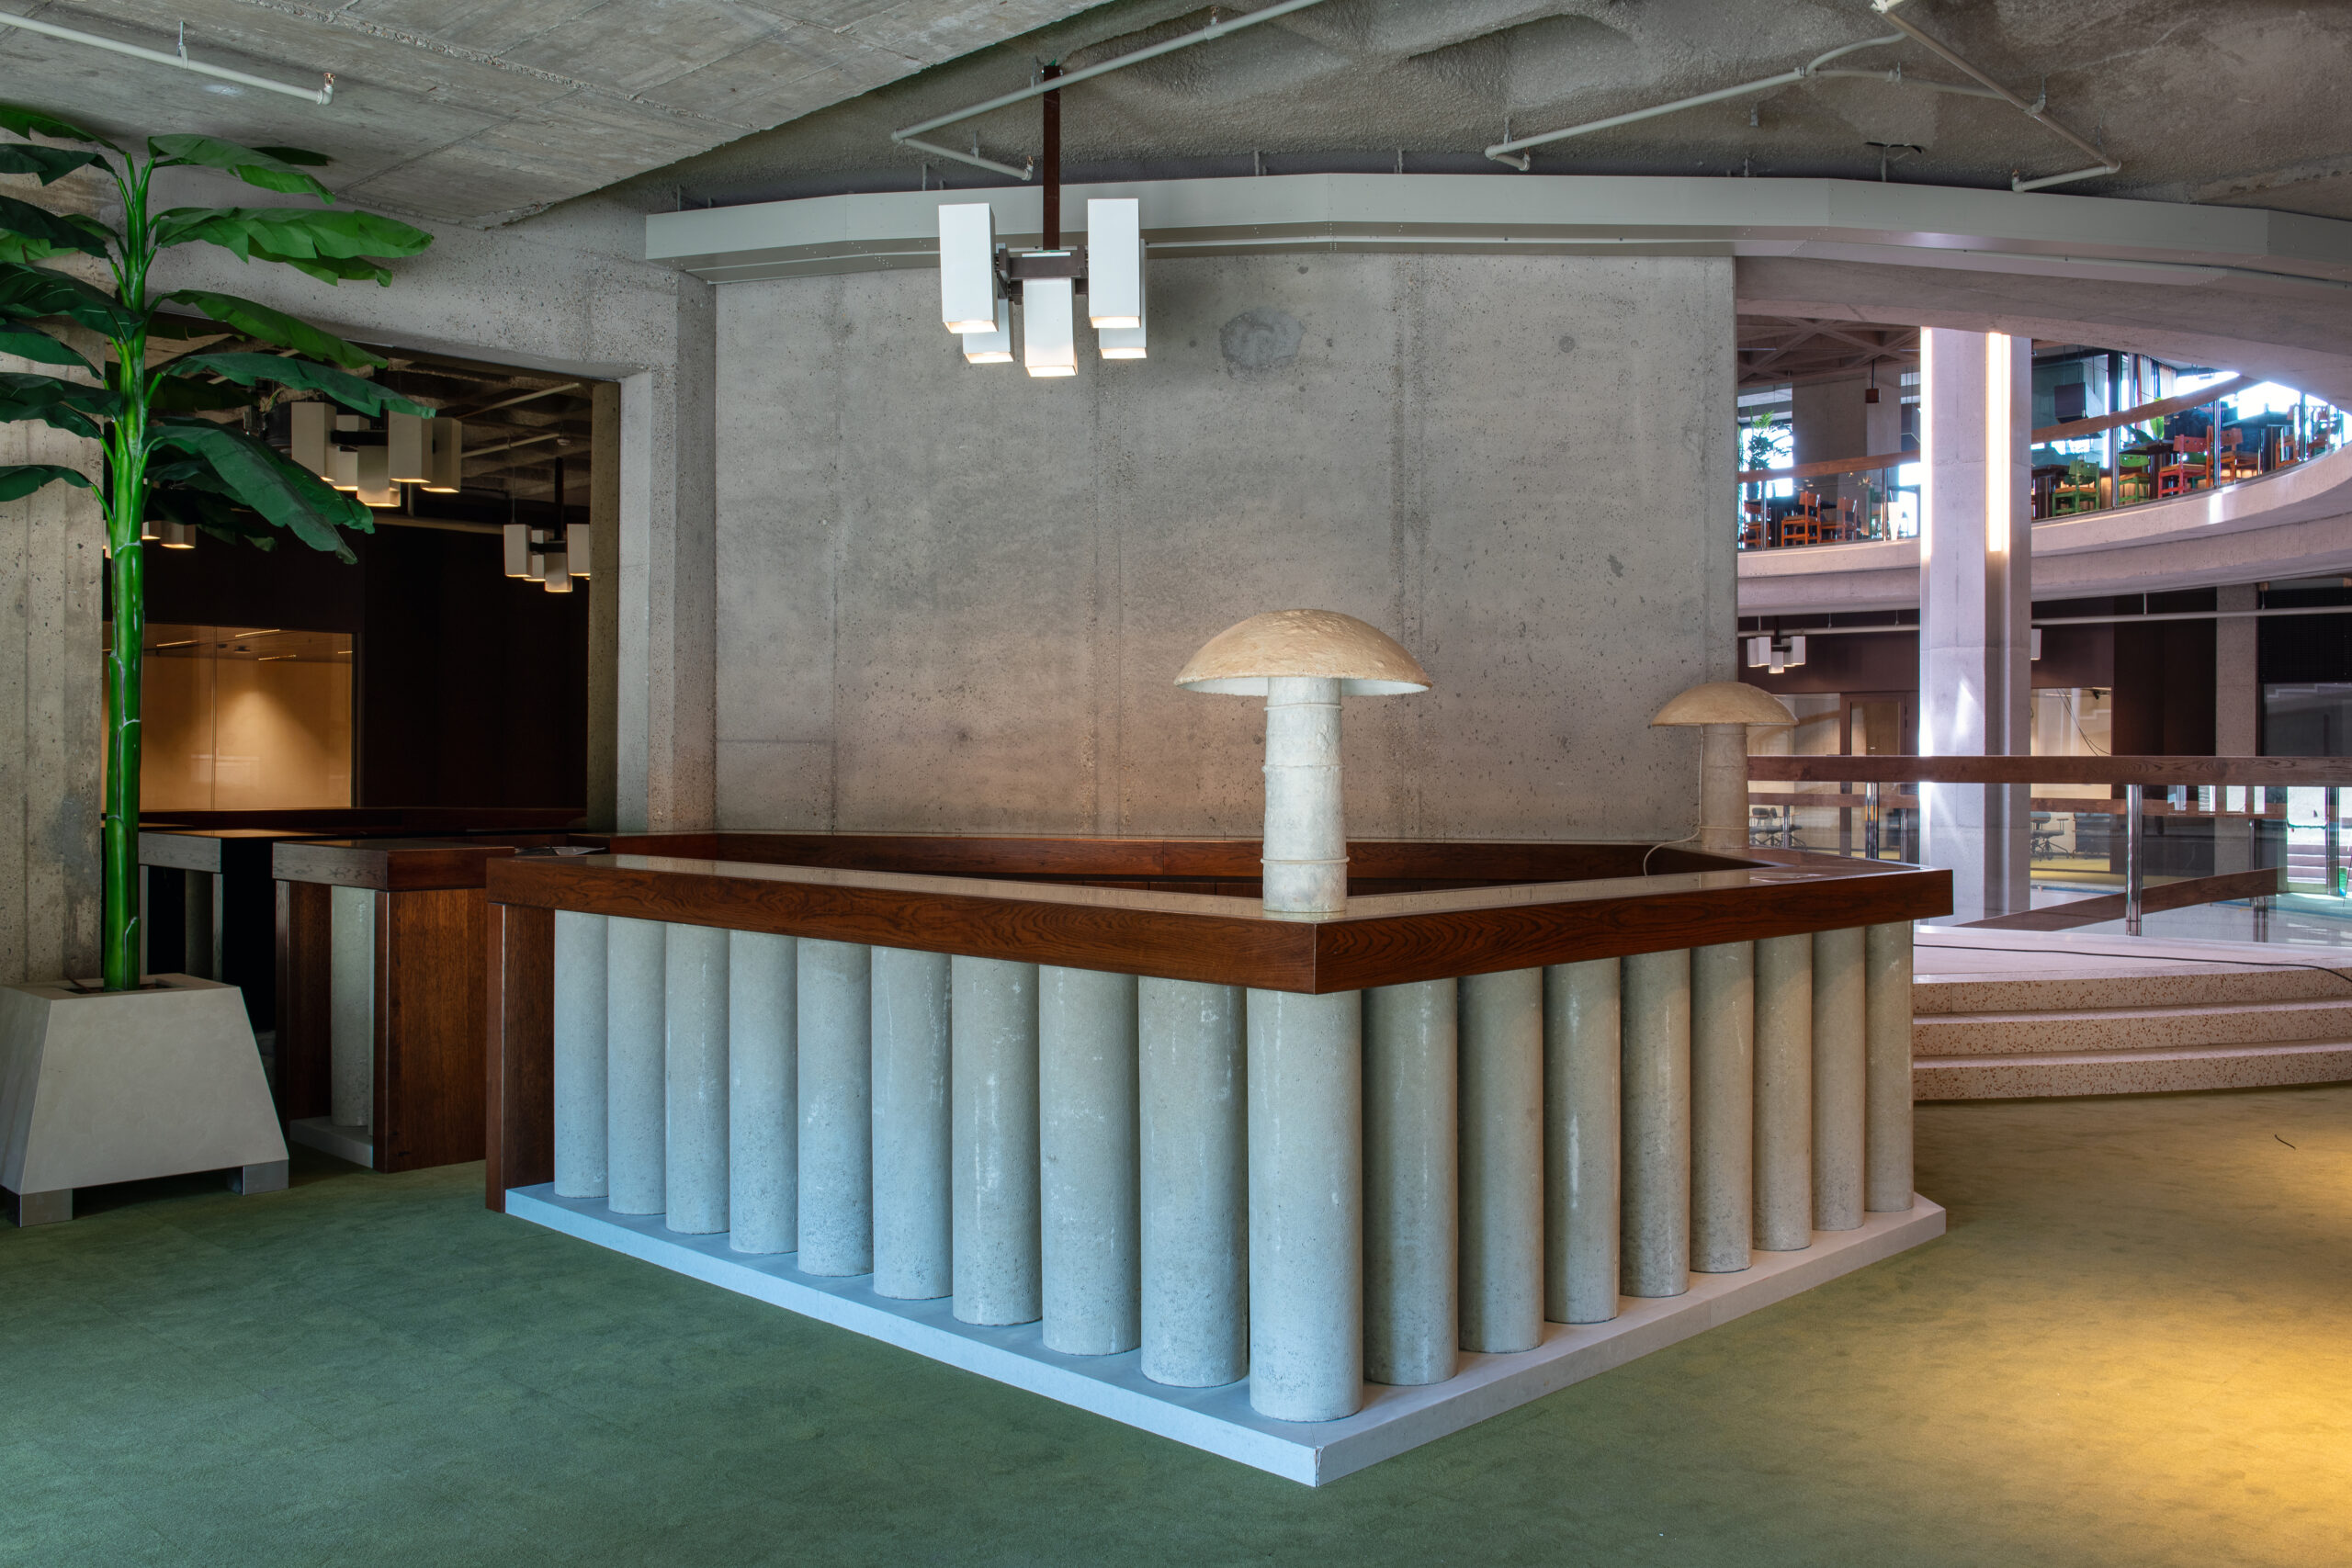 MIX by Brussels Artist Lionel Jadot hotel concrete desk with lamp